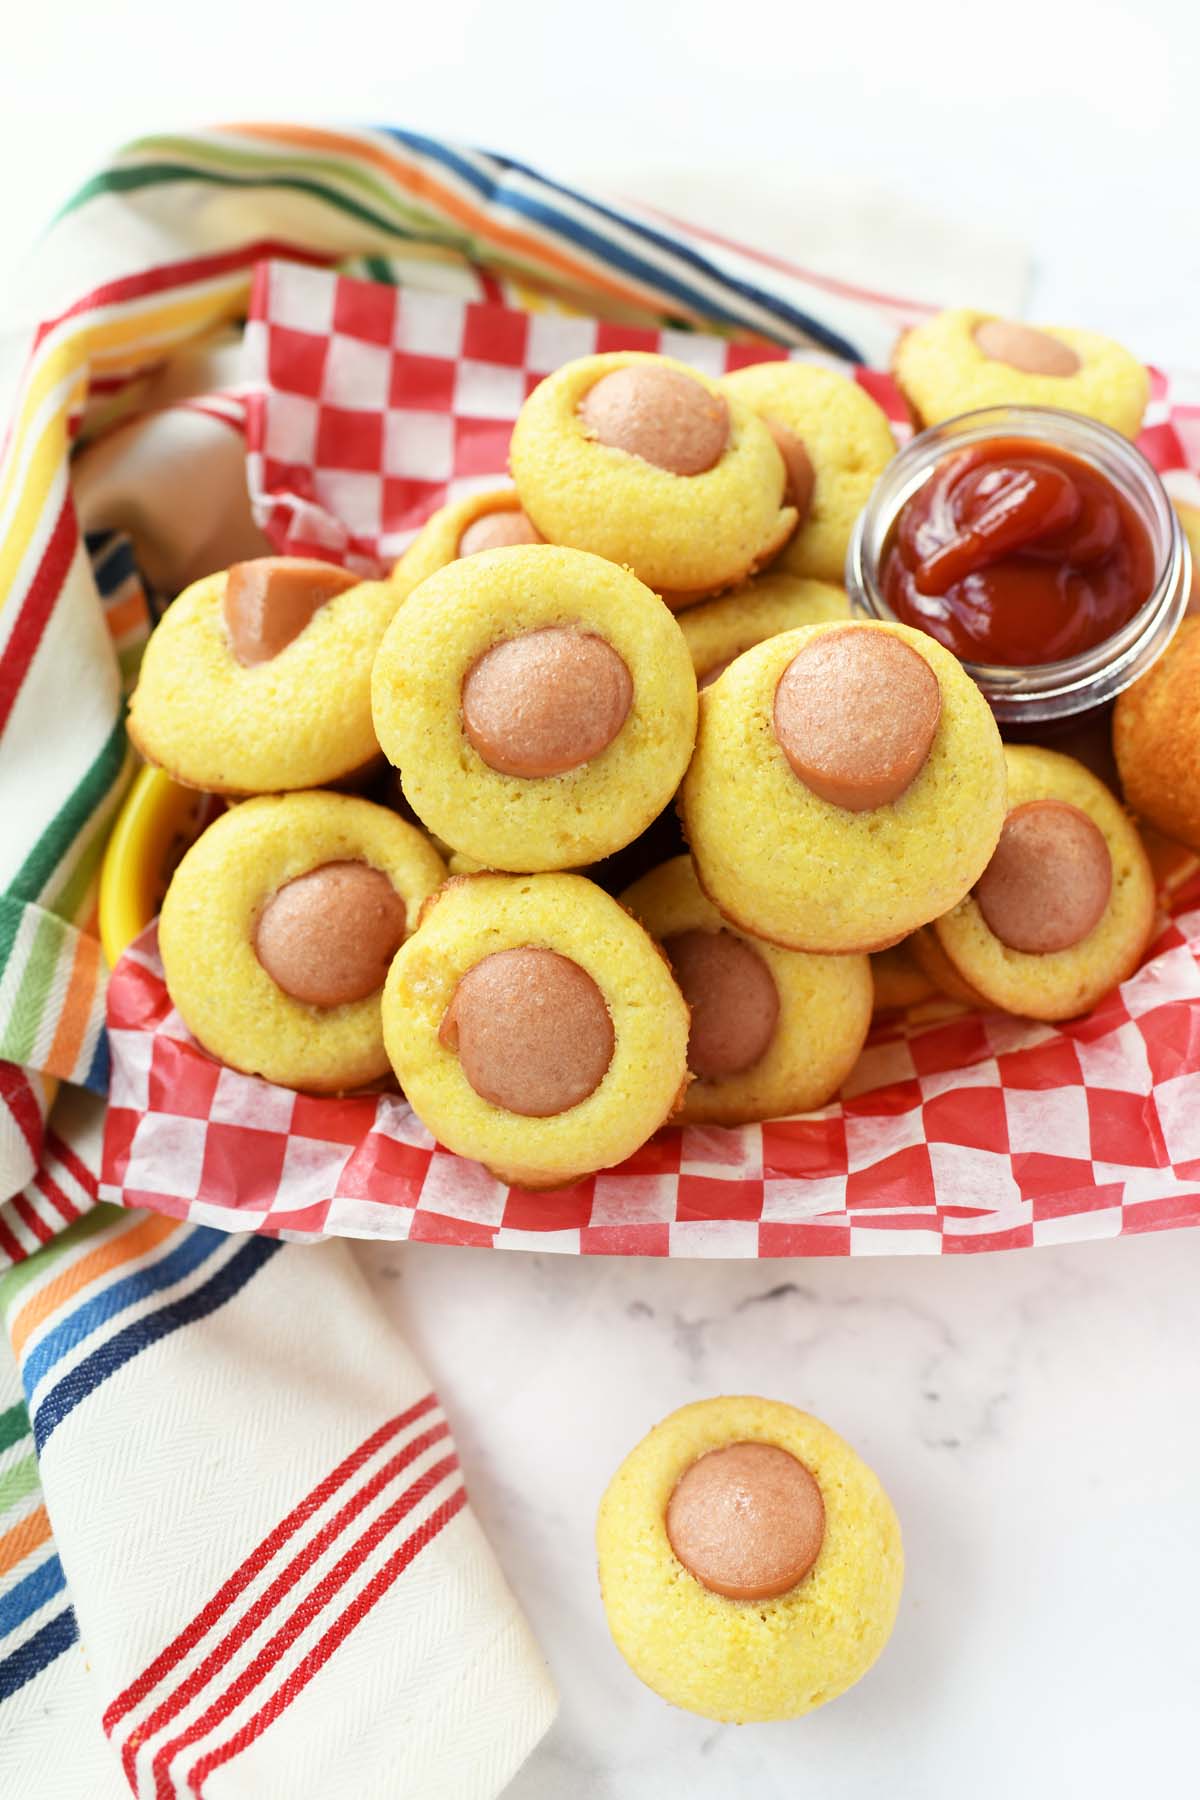 Jiffy Mini Corn Dogs in a red and white checkered basket.